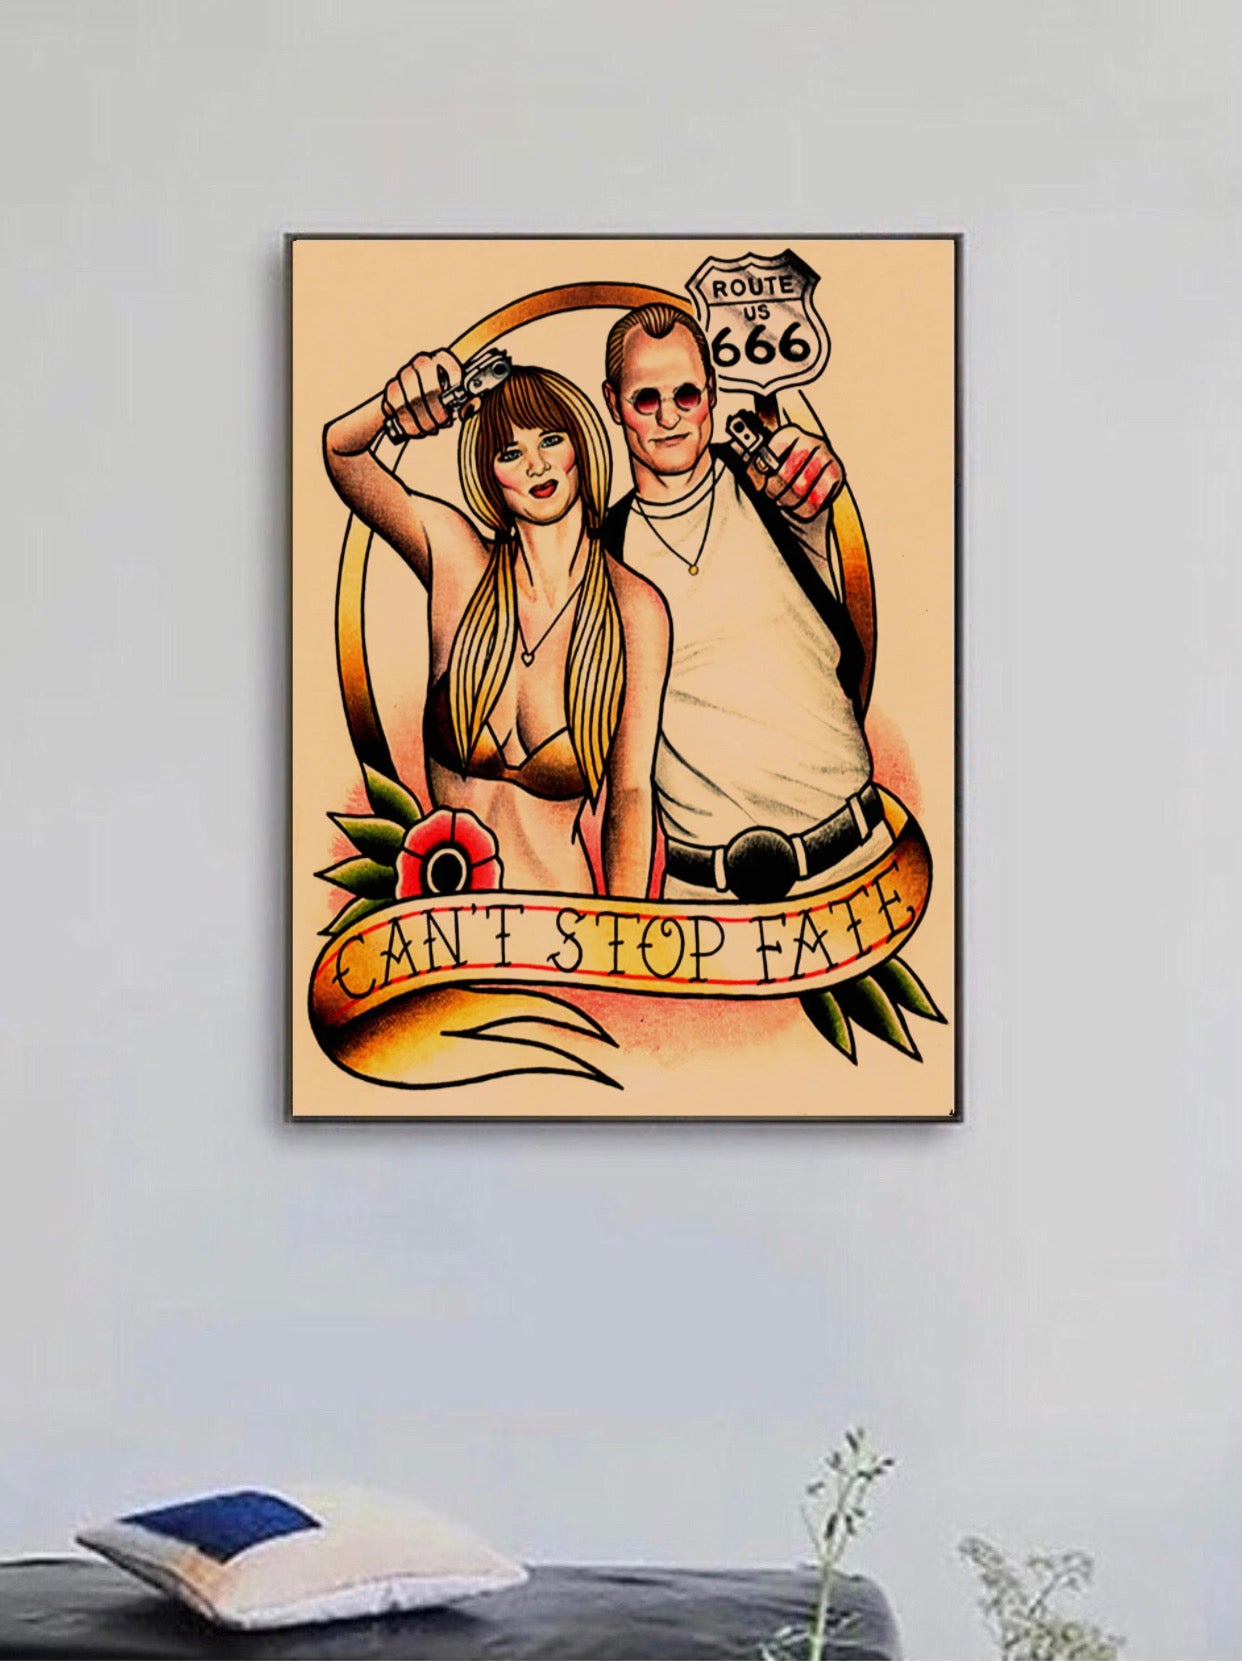 "can't stop fate" tattoo poster